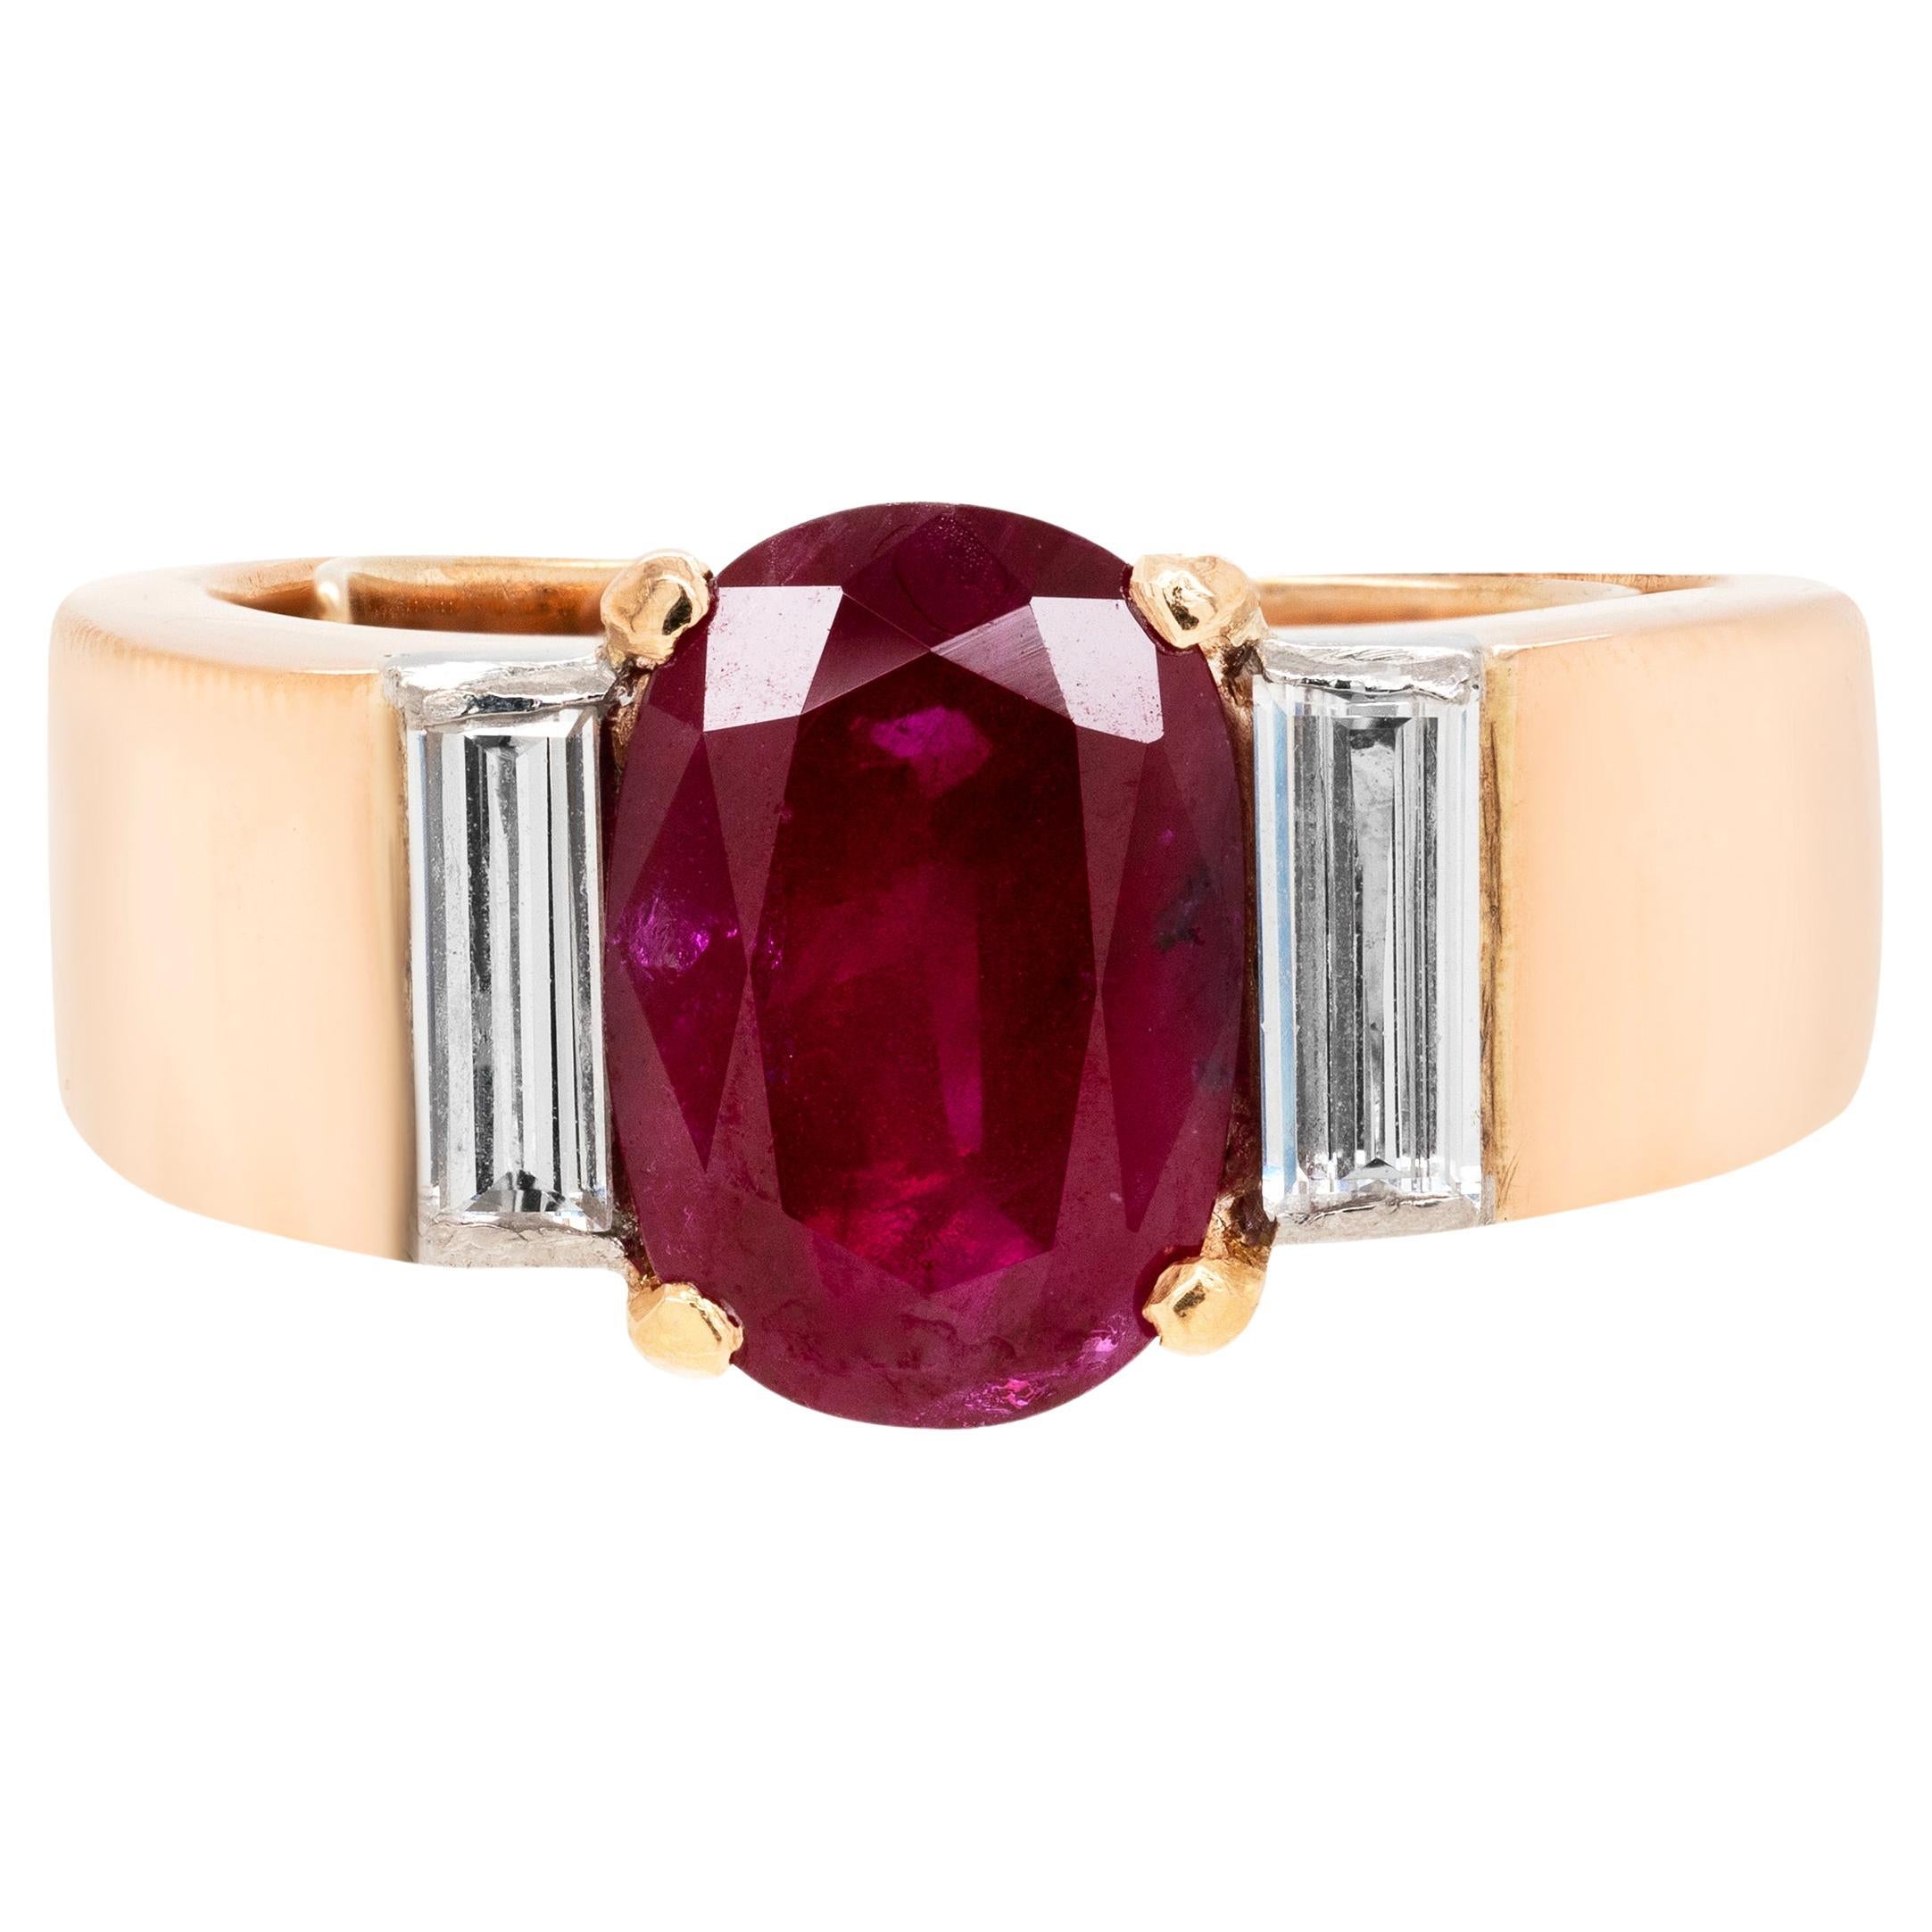 2.60 Carat Ruby and Diamond 18 Carat Yellow Gold Ring, circa 1960s For Sale